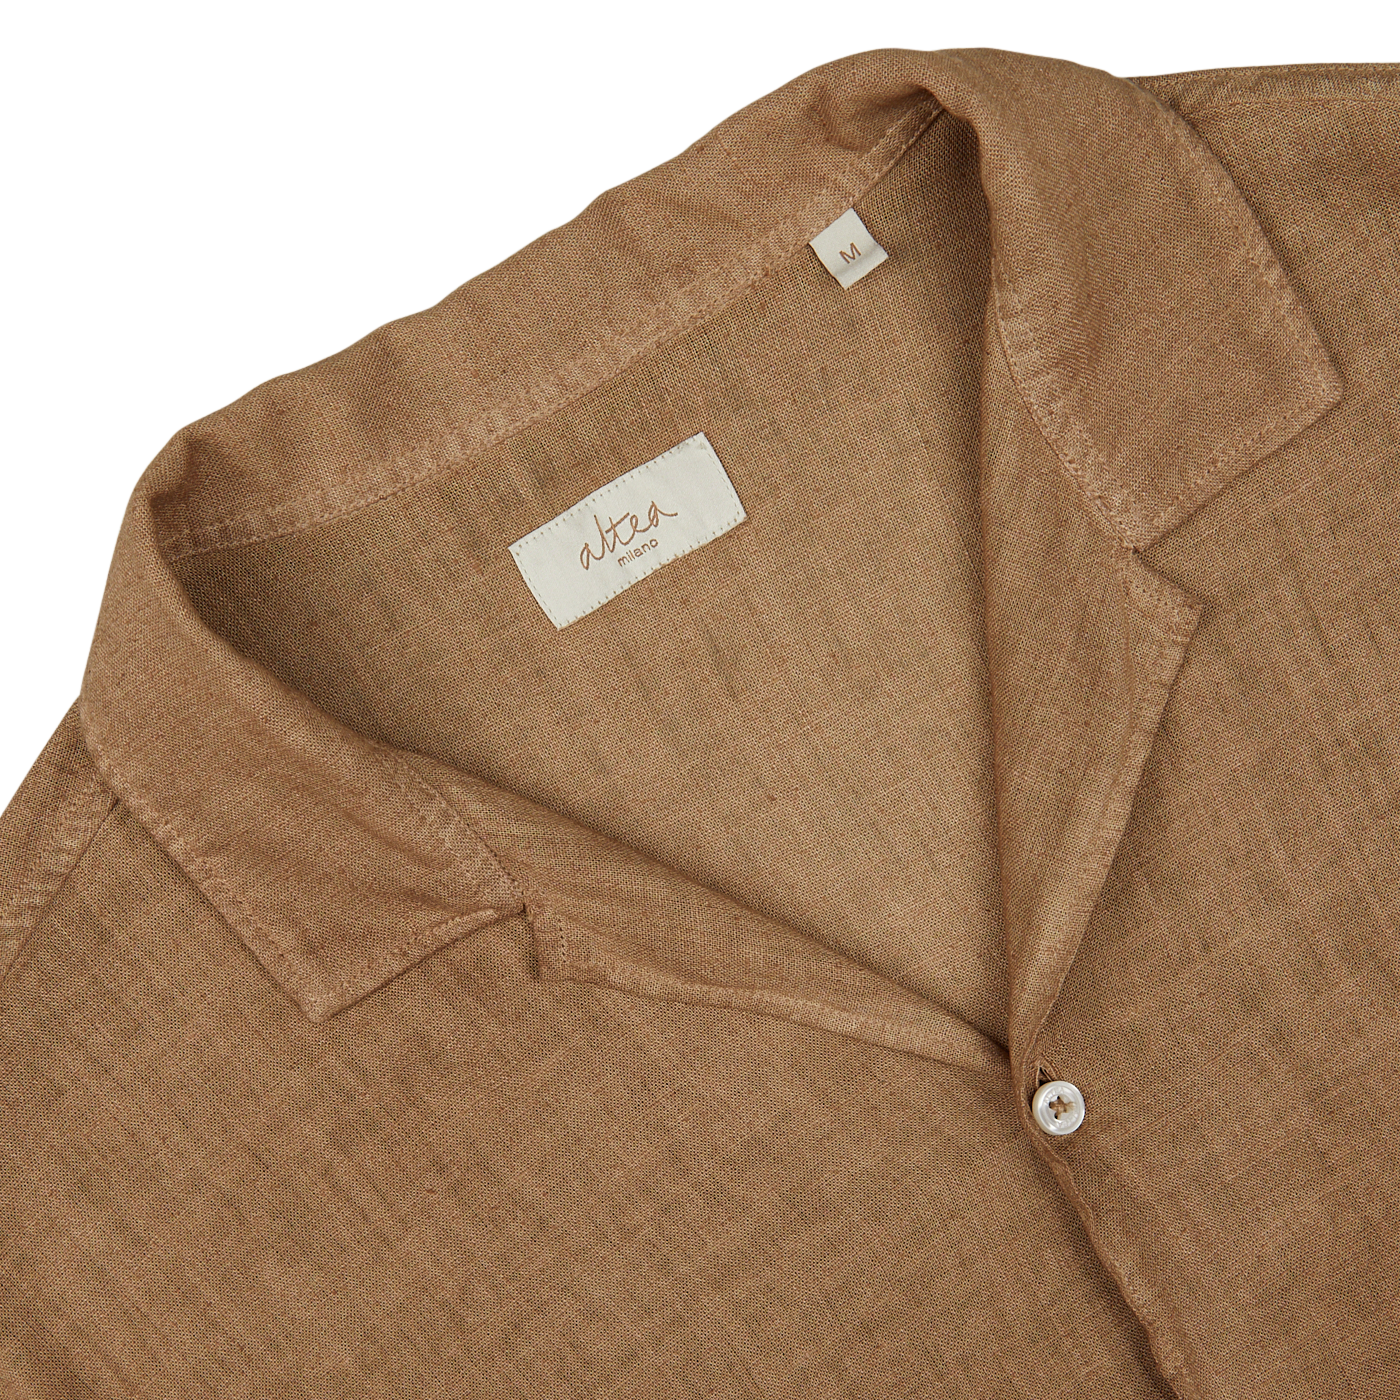 Close-up of an Altea Tobacco Brown Linen Blend Camp Collar Shirt with a visible label and mother-of-pearl button.